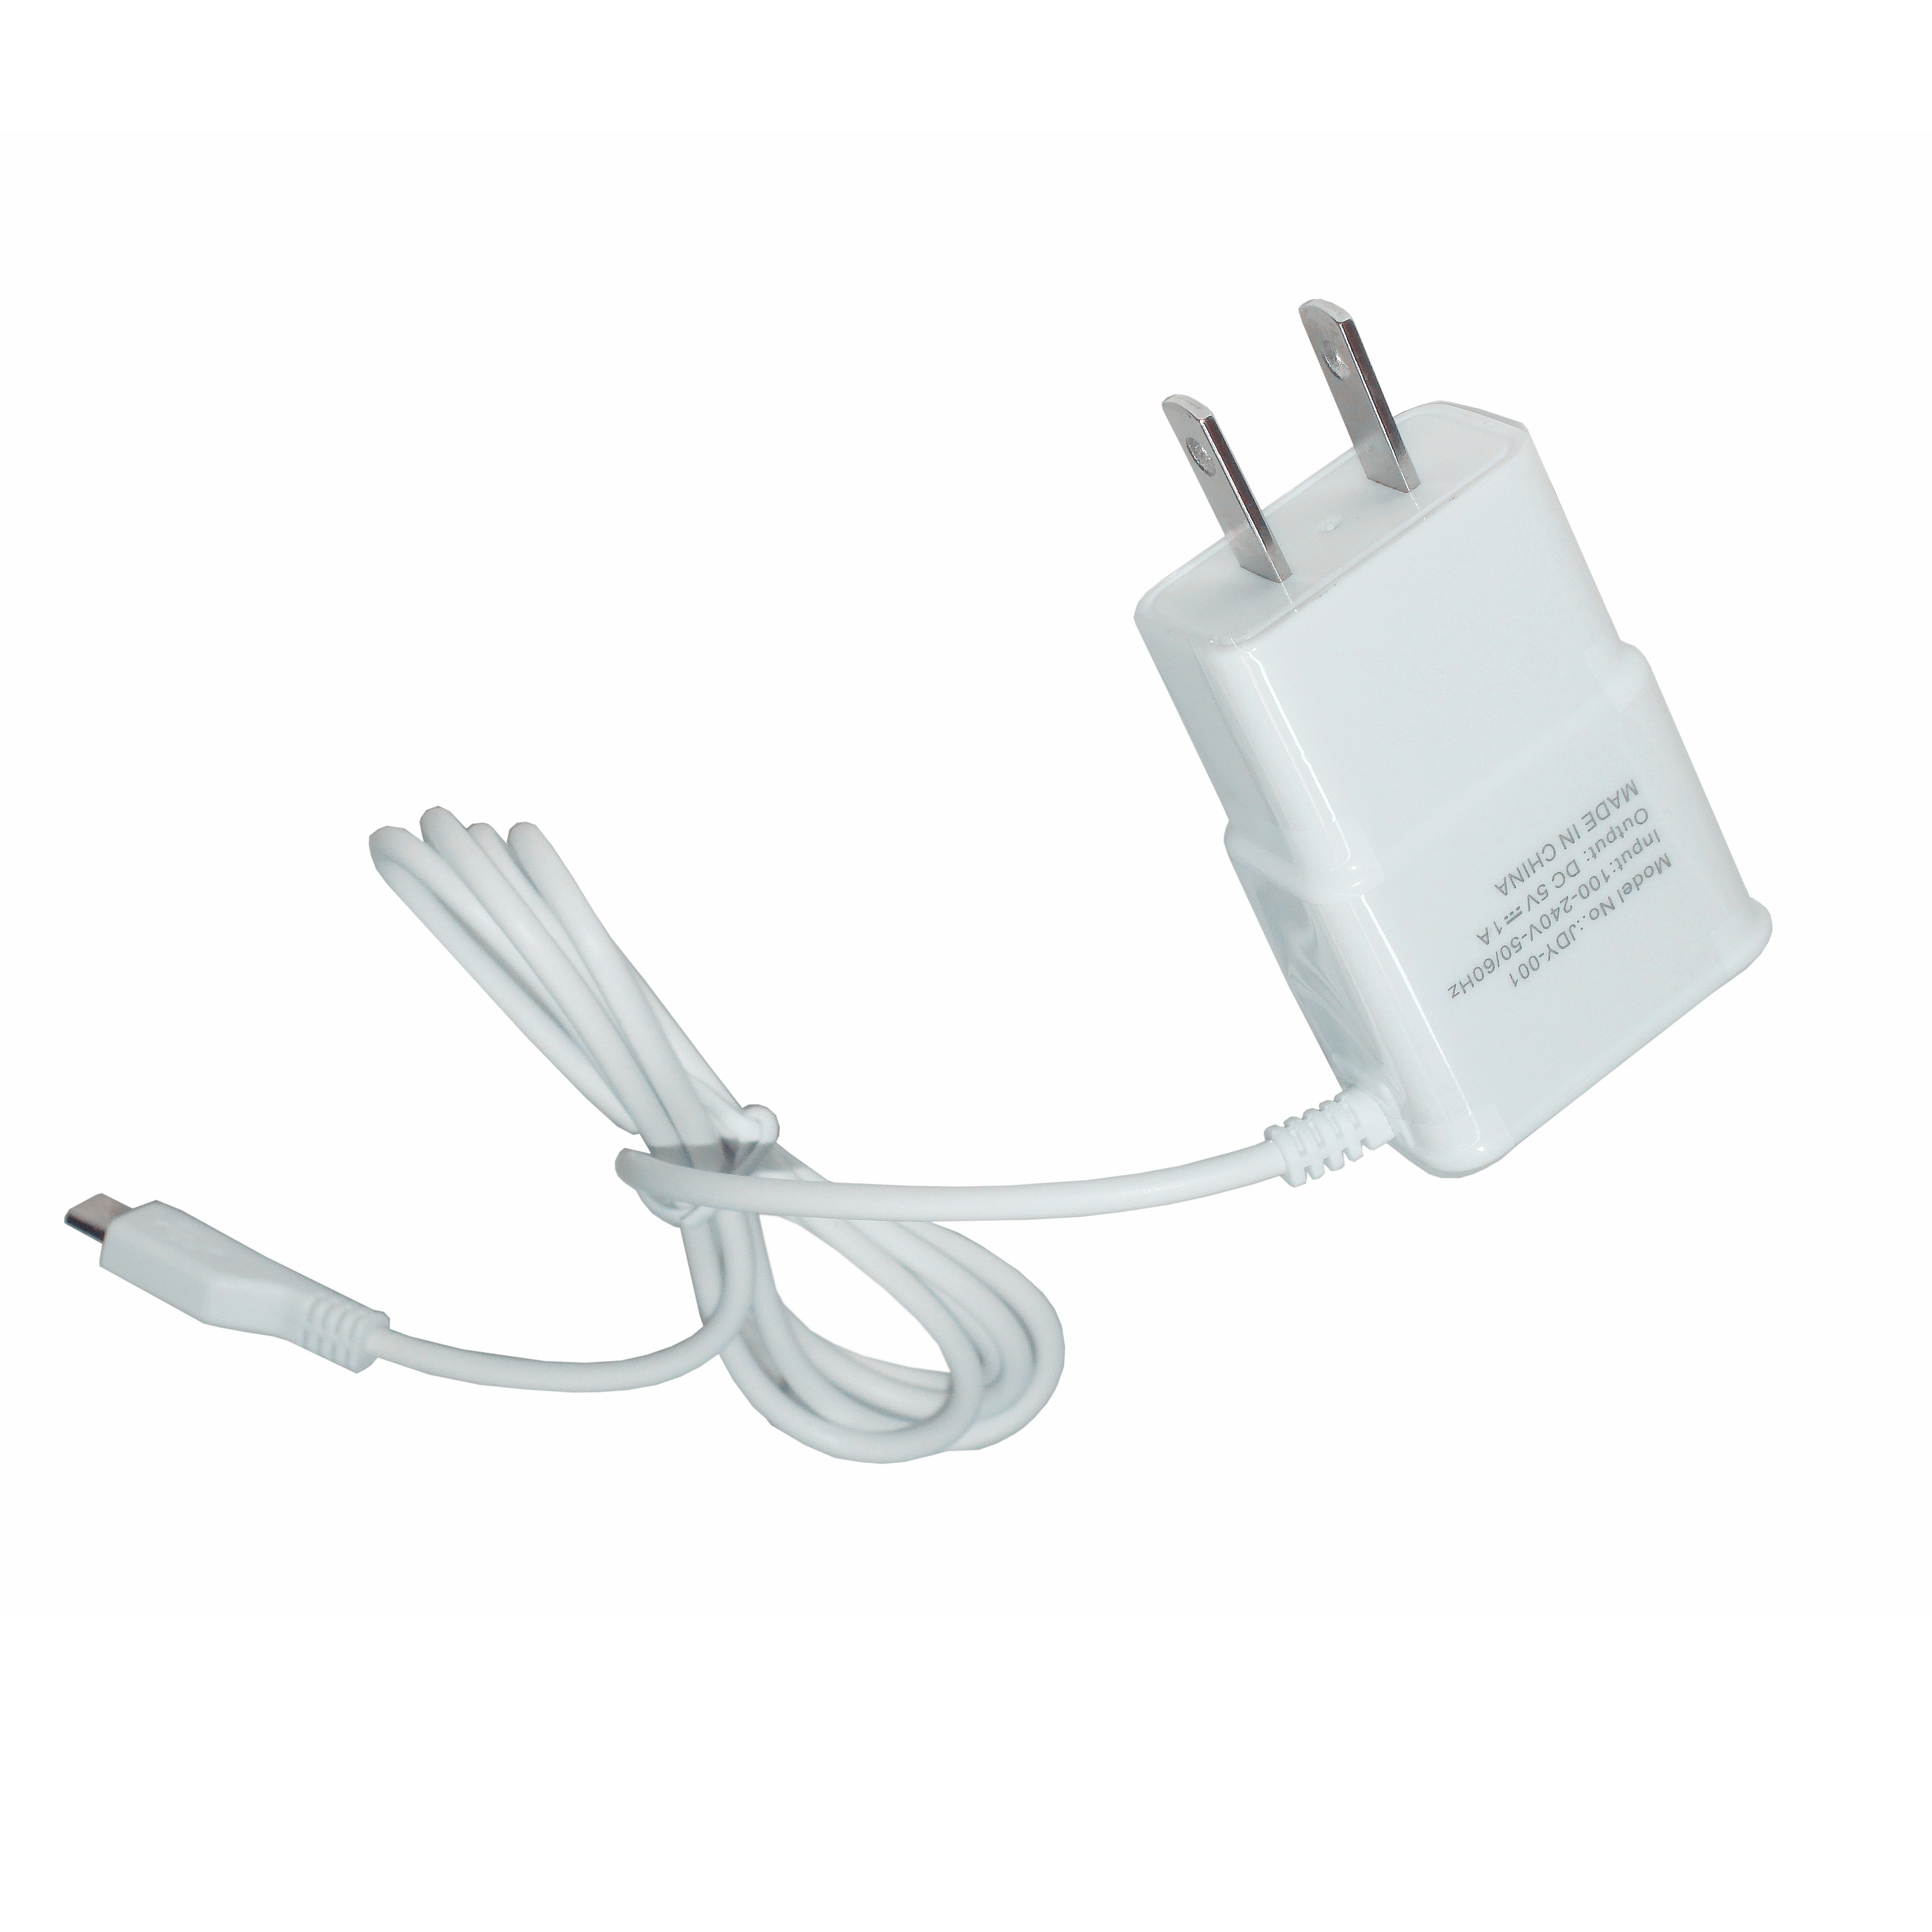 samsung wall charger with cable output 5v/9v/12v usb mobile charger in Europe